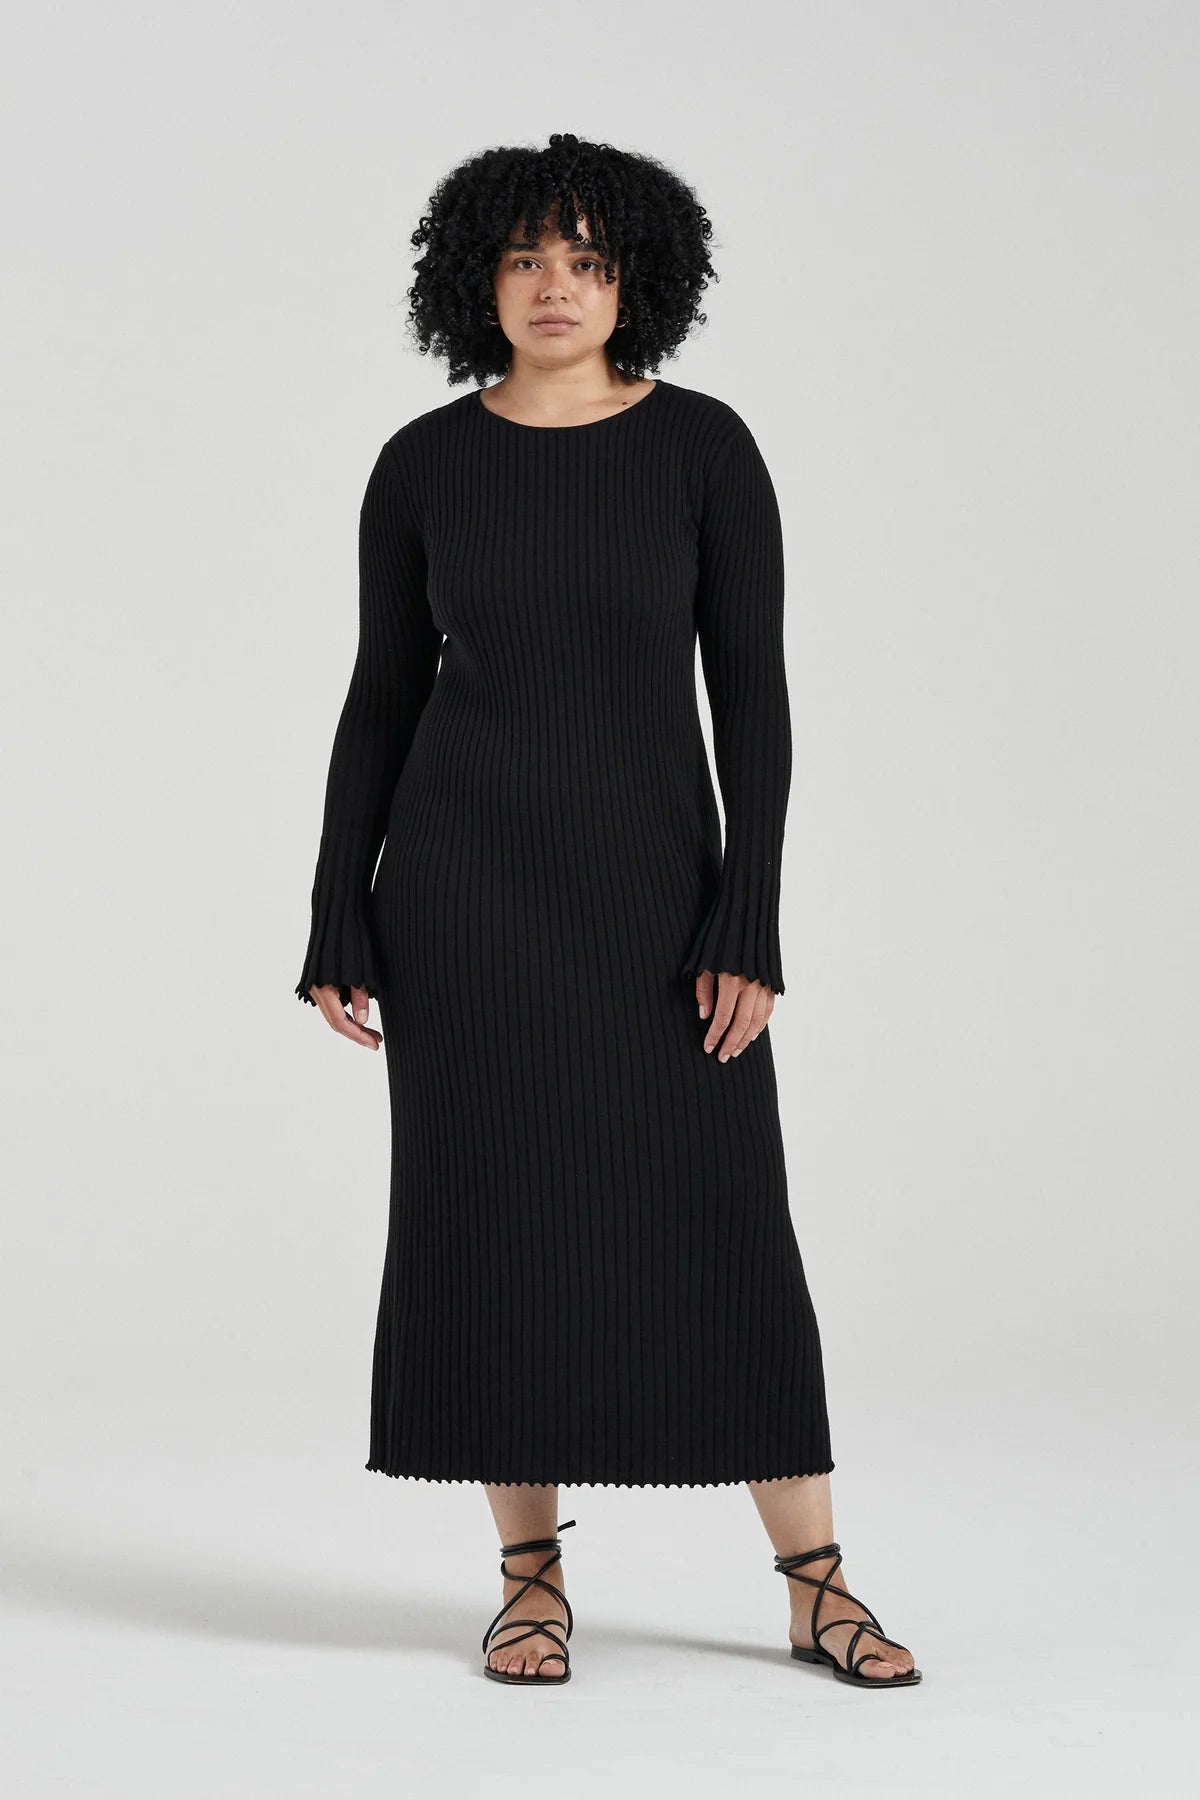 THE CLEO DRESS - BLACK - FRIENDS WITH FRANK